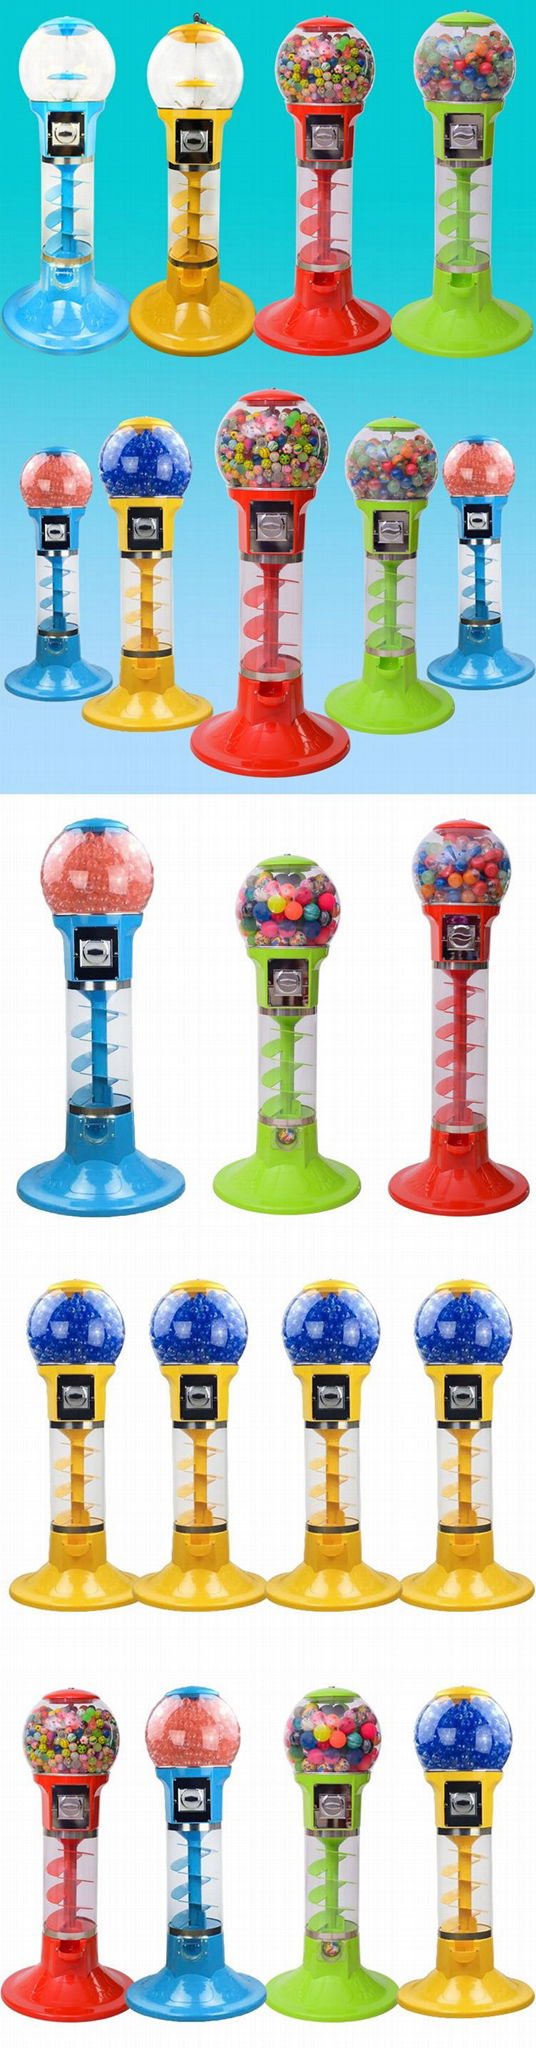 Gumball Candy Bouncy Balls Toy Capsules Spiral Vending Machine 5